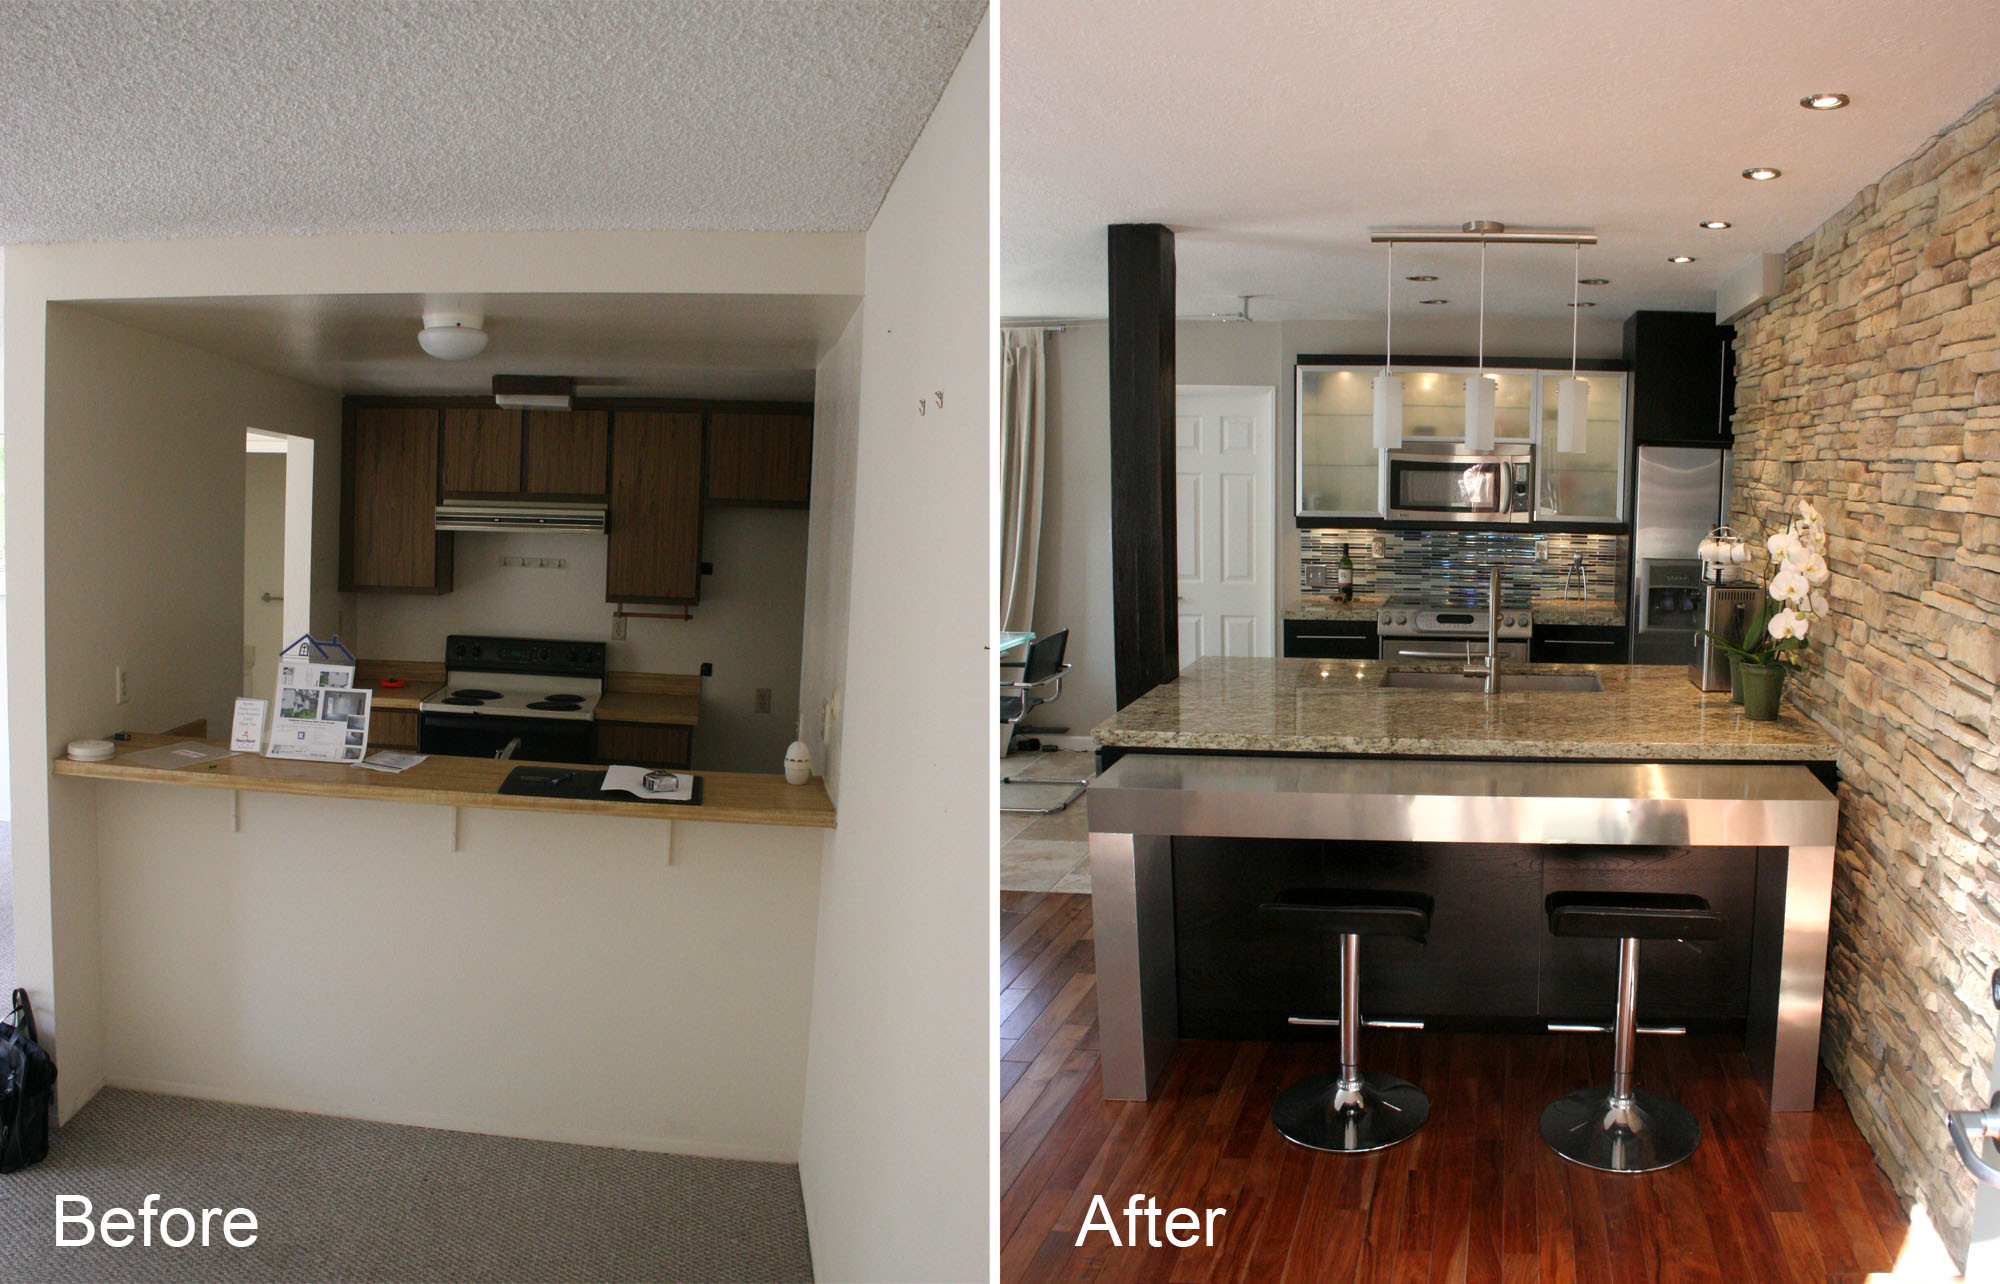 Kitchen Remodel Before And After
 Kitchen Planning and Design Kitchen remodeling in a